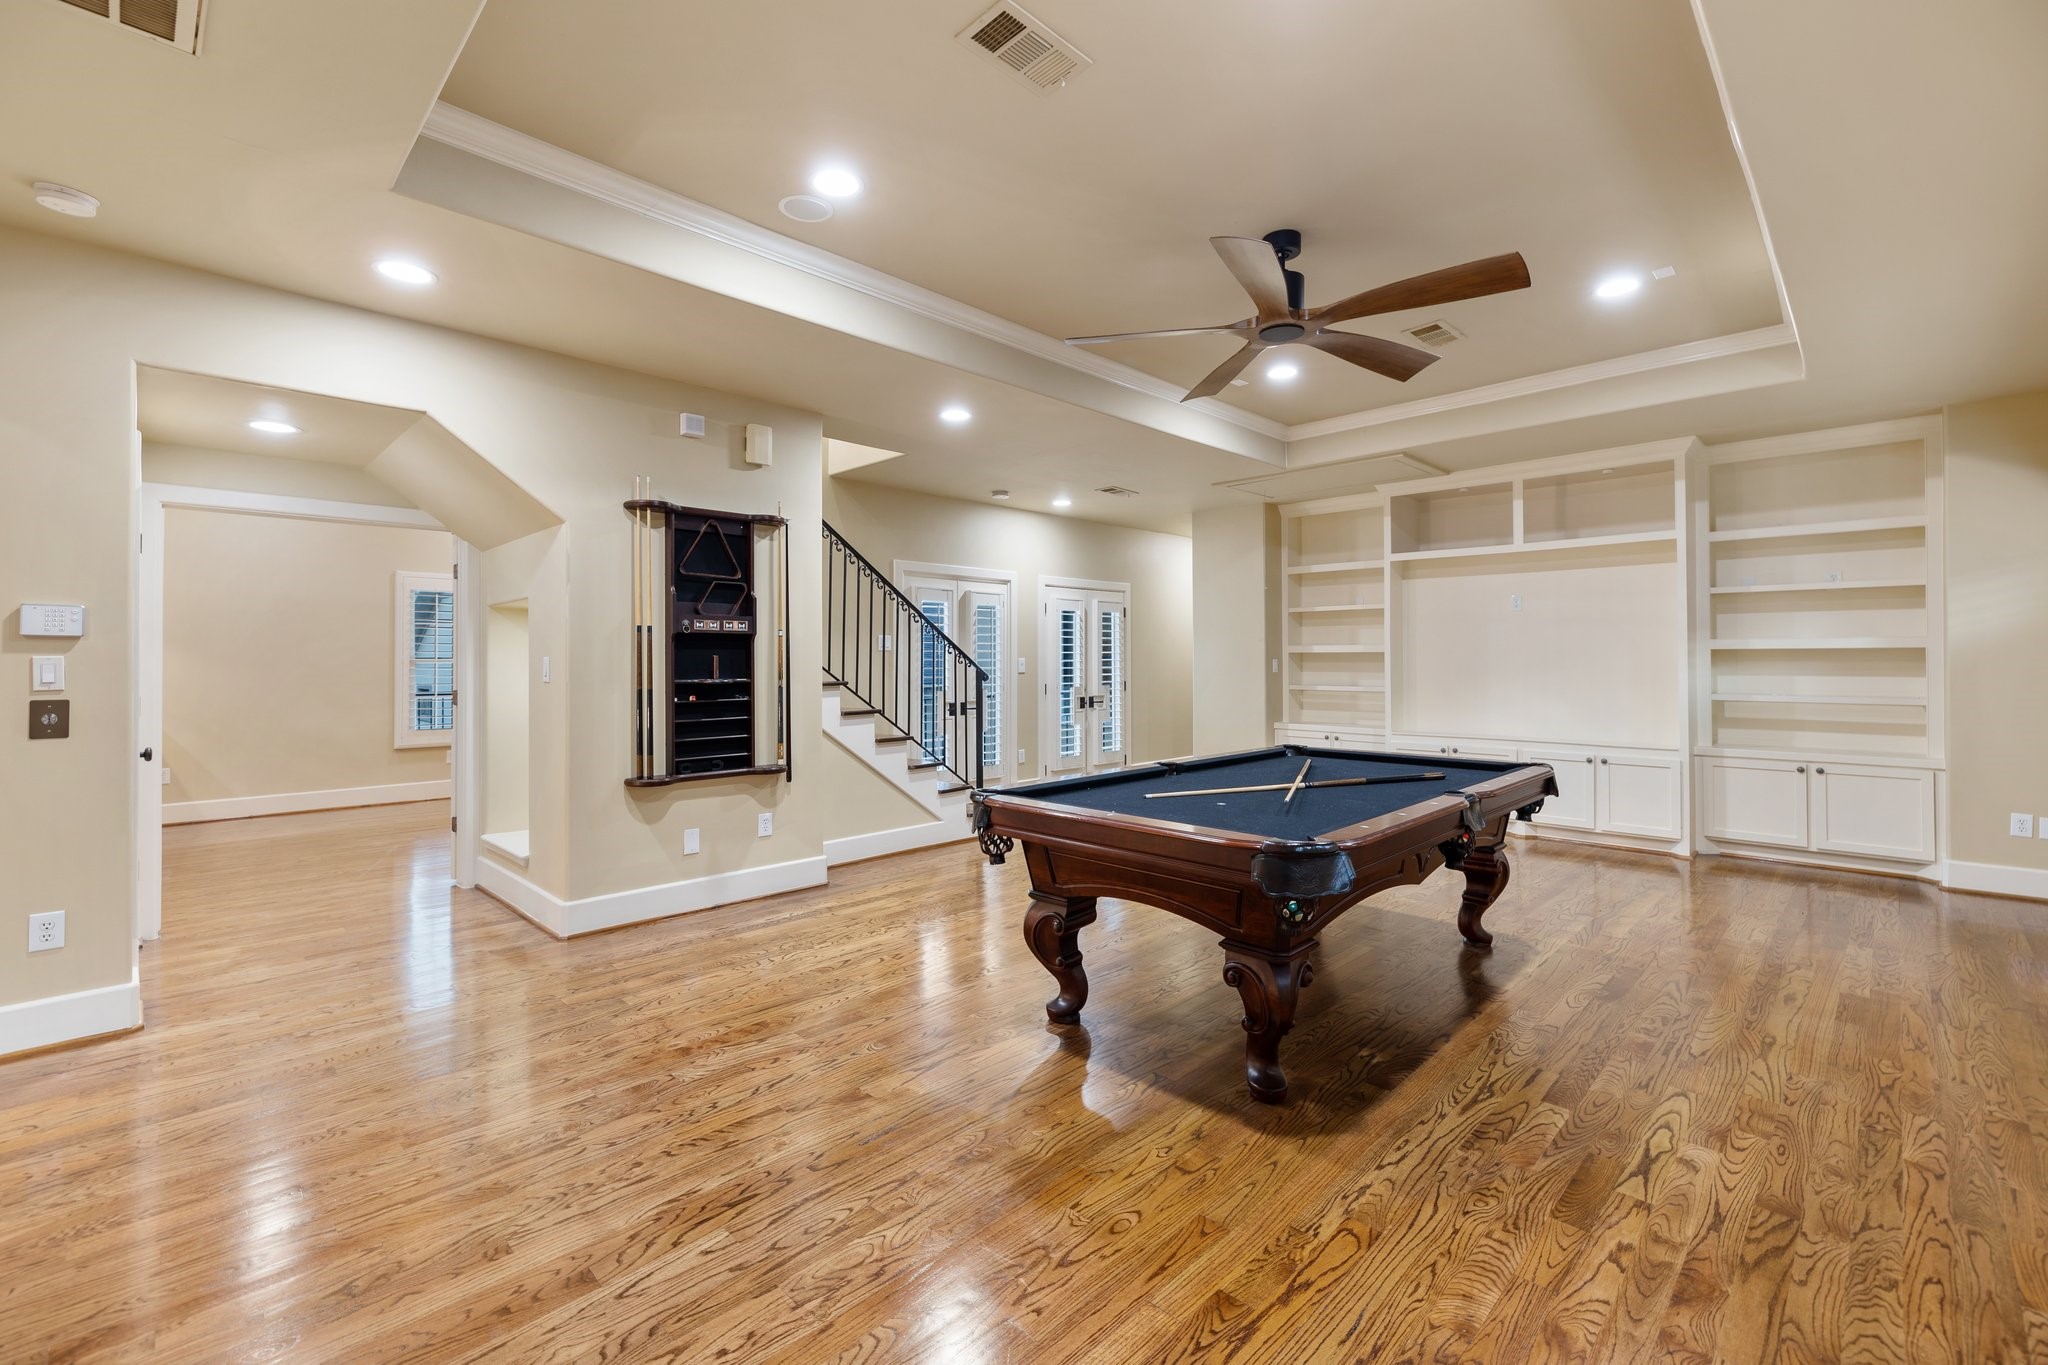 GAMEROOM - Game room with oak floors, tray ceiling, crown molding and built-in entertainment center.